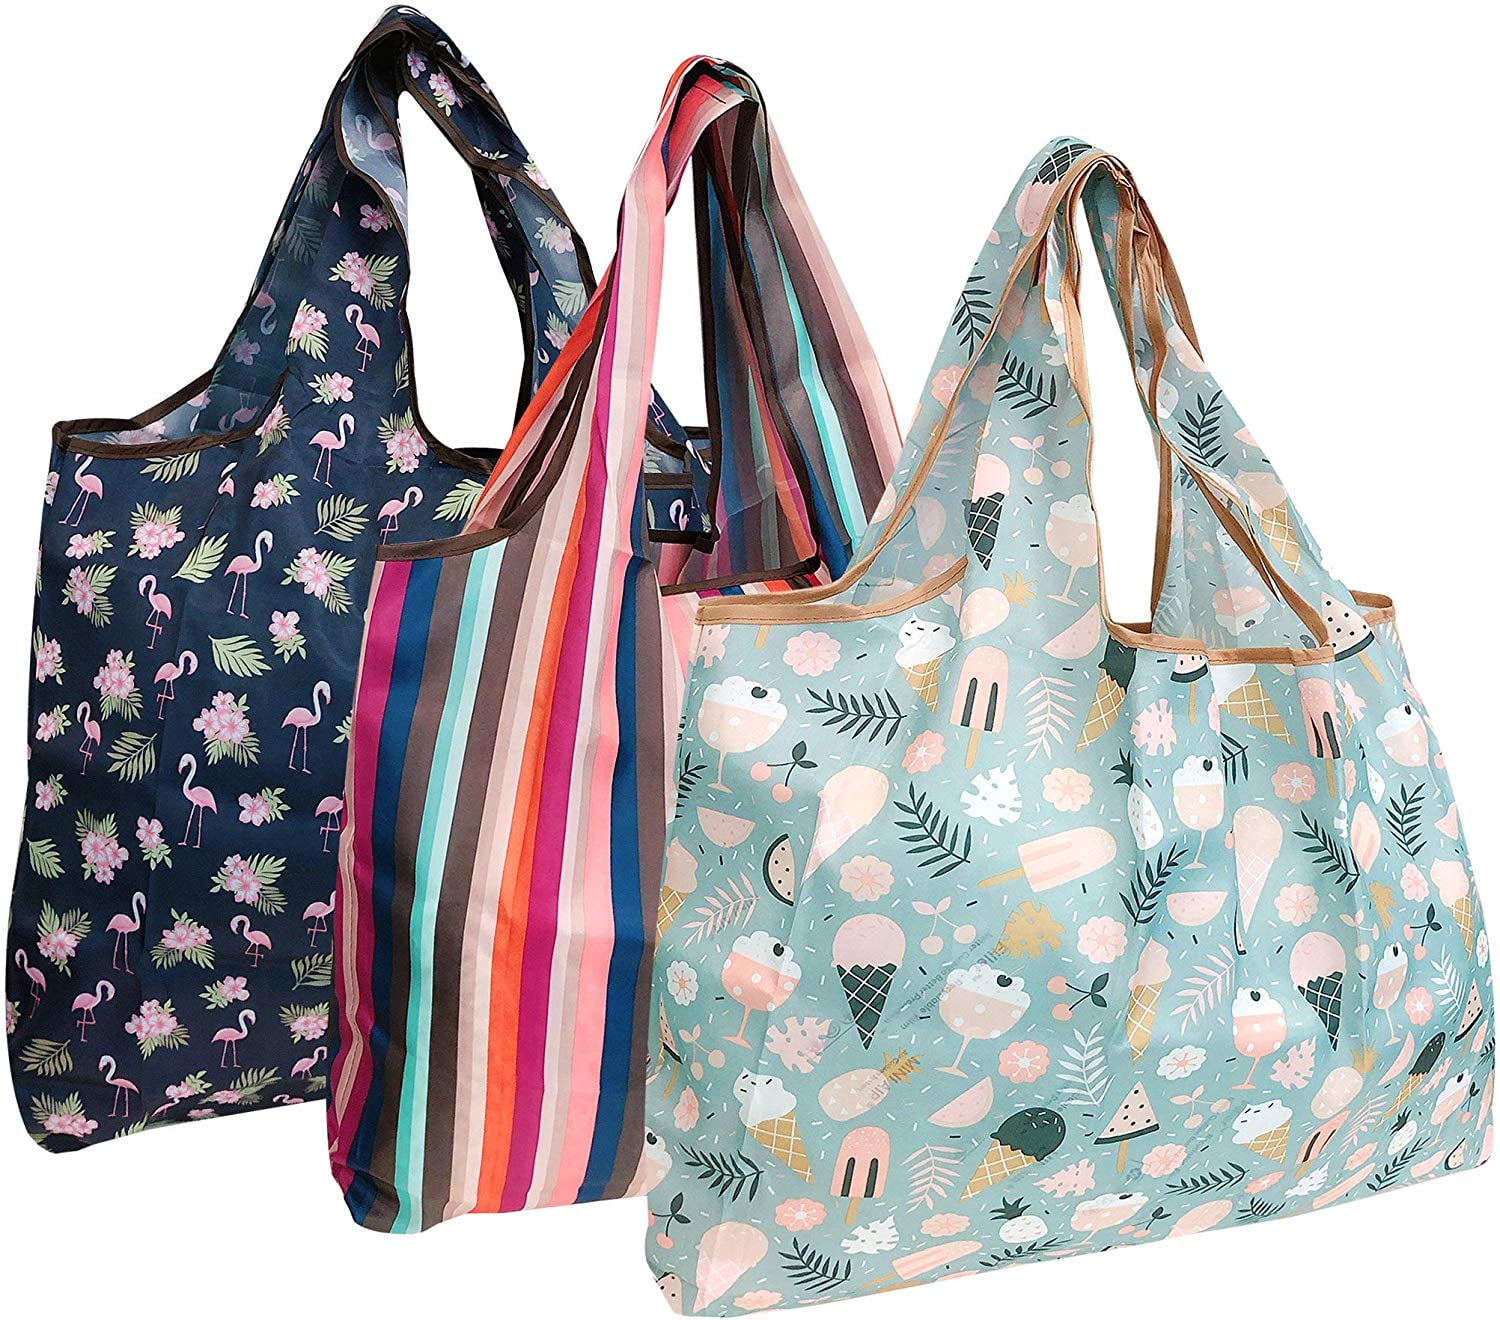 Details about    Eco-Friendly Nylon Wrapable Reusable Grocery Shopping Bags up to 60LB Set of 3 